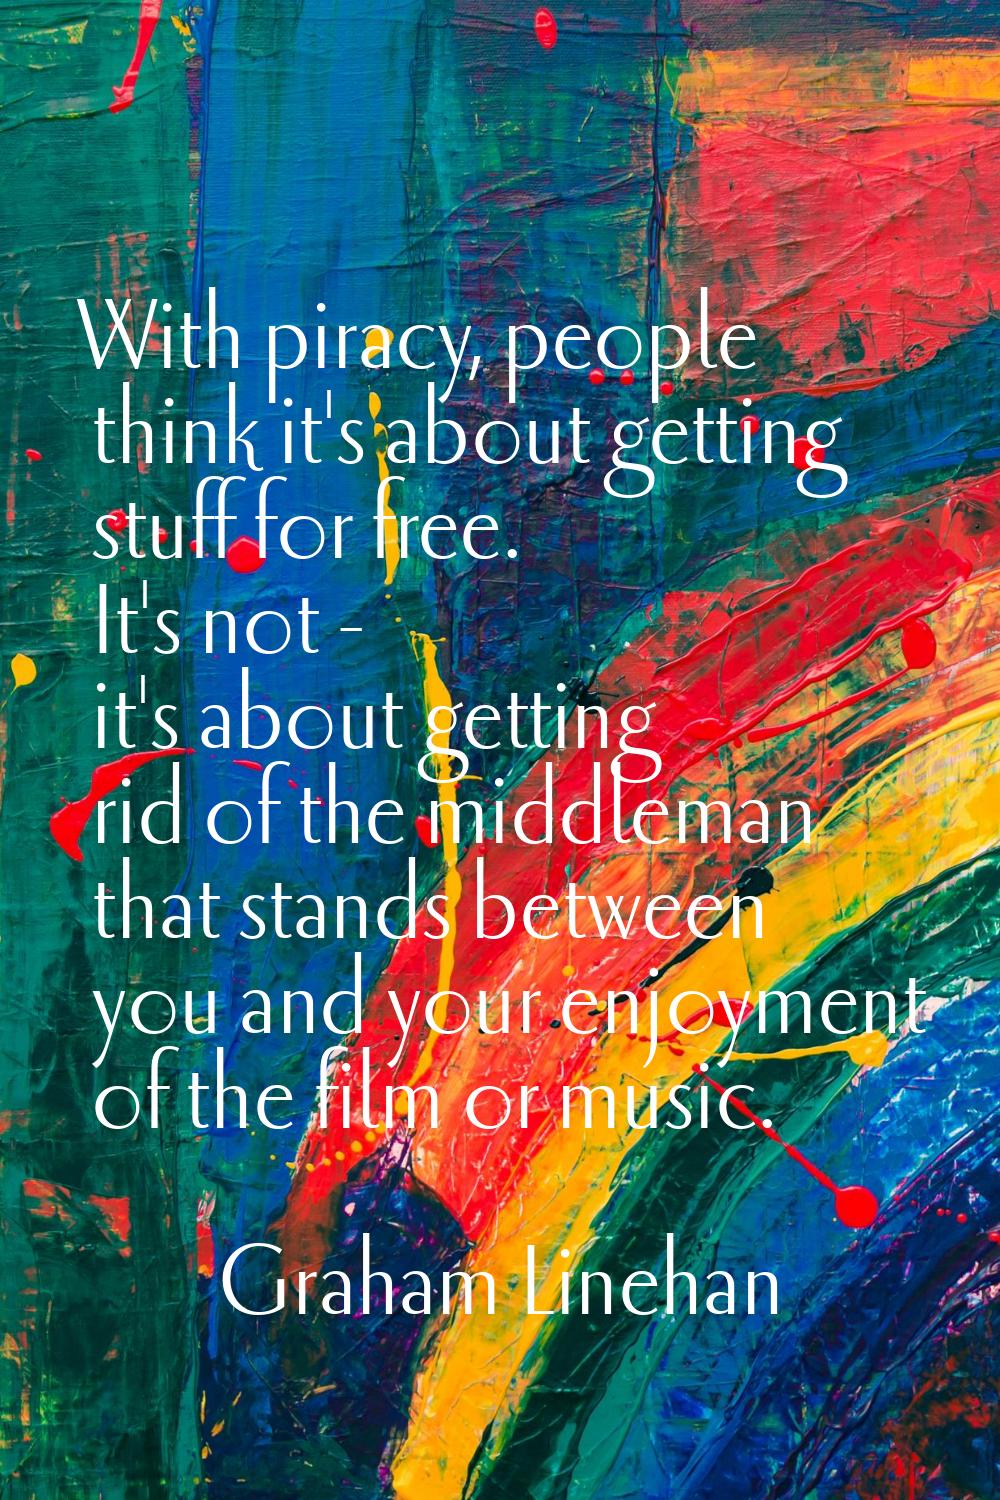 With piracy, people think it's about getting stuff for free. It's not - it's about getting rid of t